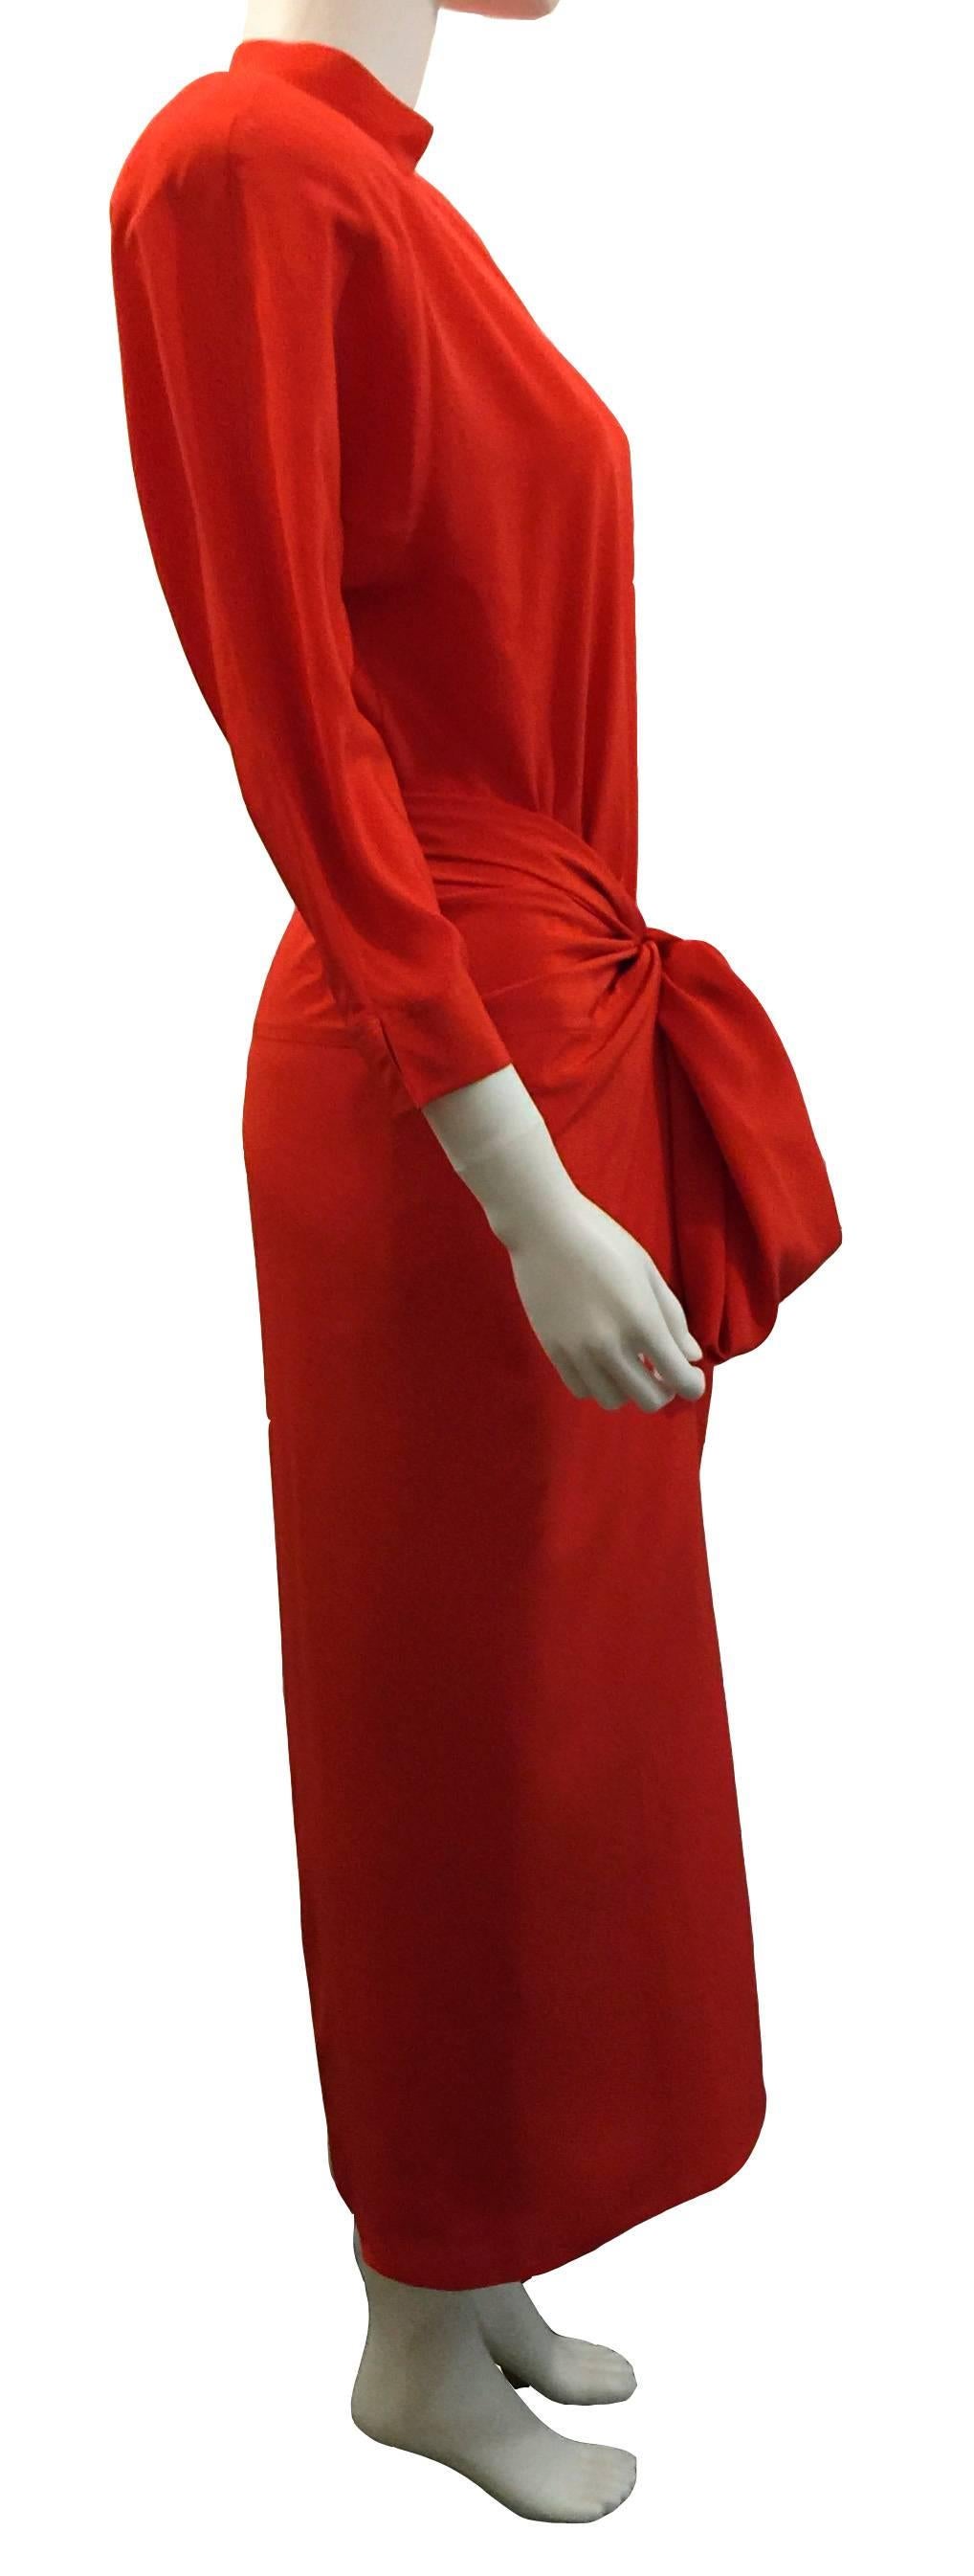 
Gianfranco Ferré Vintage Dress with Over-Skirt.  Beautiful two piece Red 100% Pure Silk Oriental feel to dress style.  Long column style with long sleeves to wrist.   Button detail with zip on back.  With Shoulder Pads (can be removed if